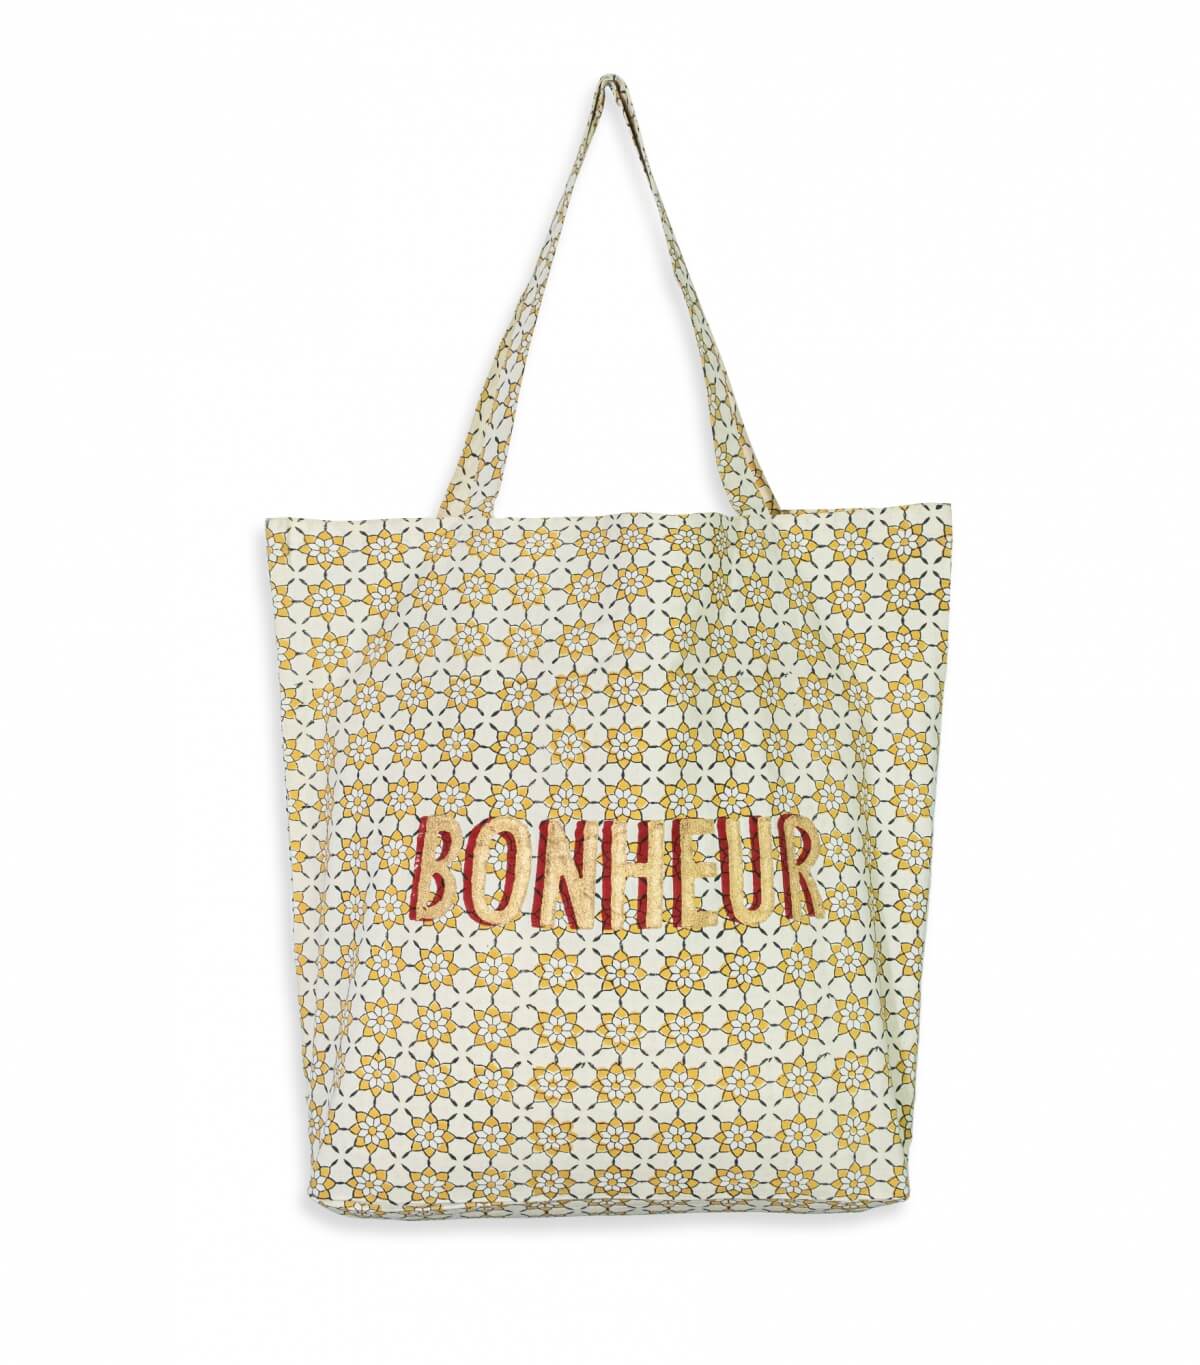 Indian shopping bag 16x18x5 inches - yellow